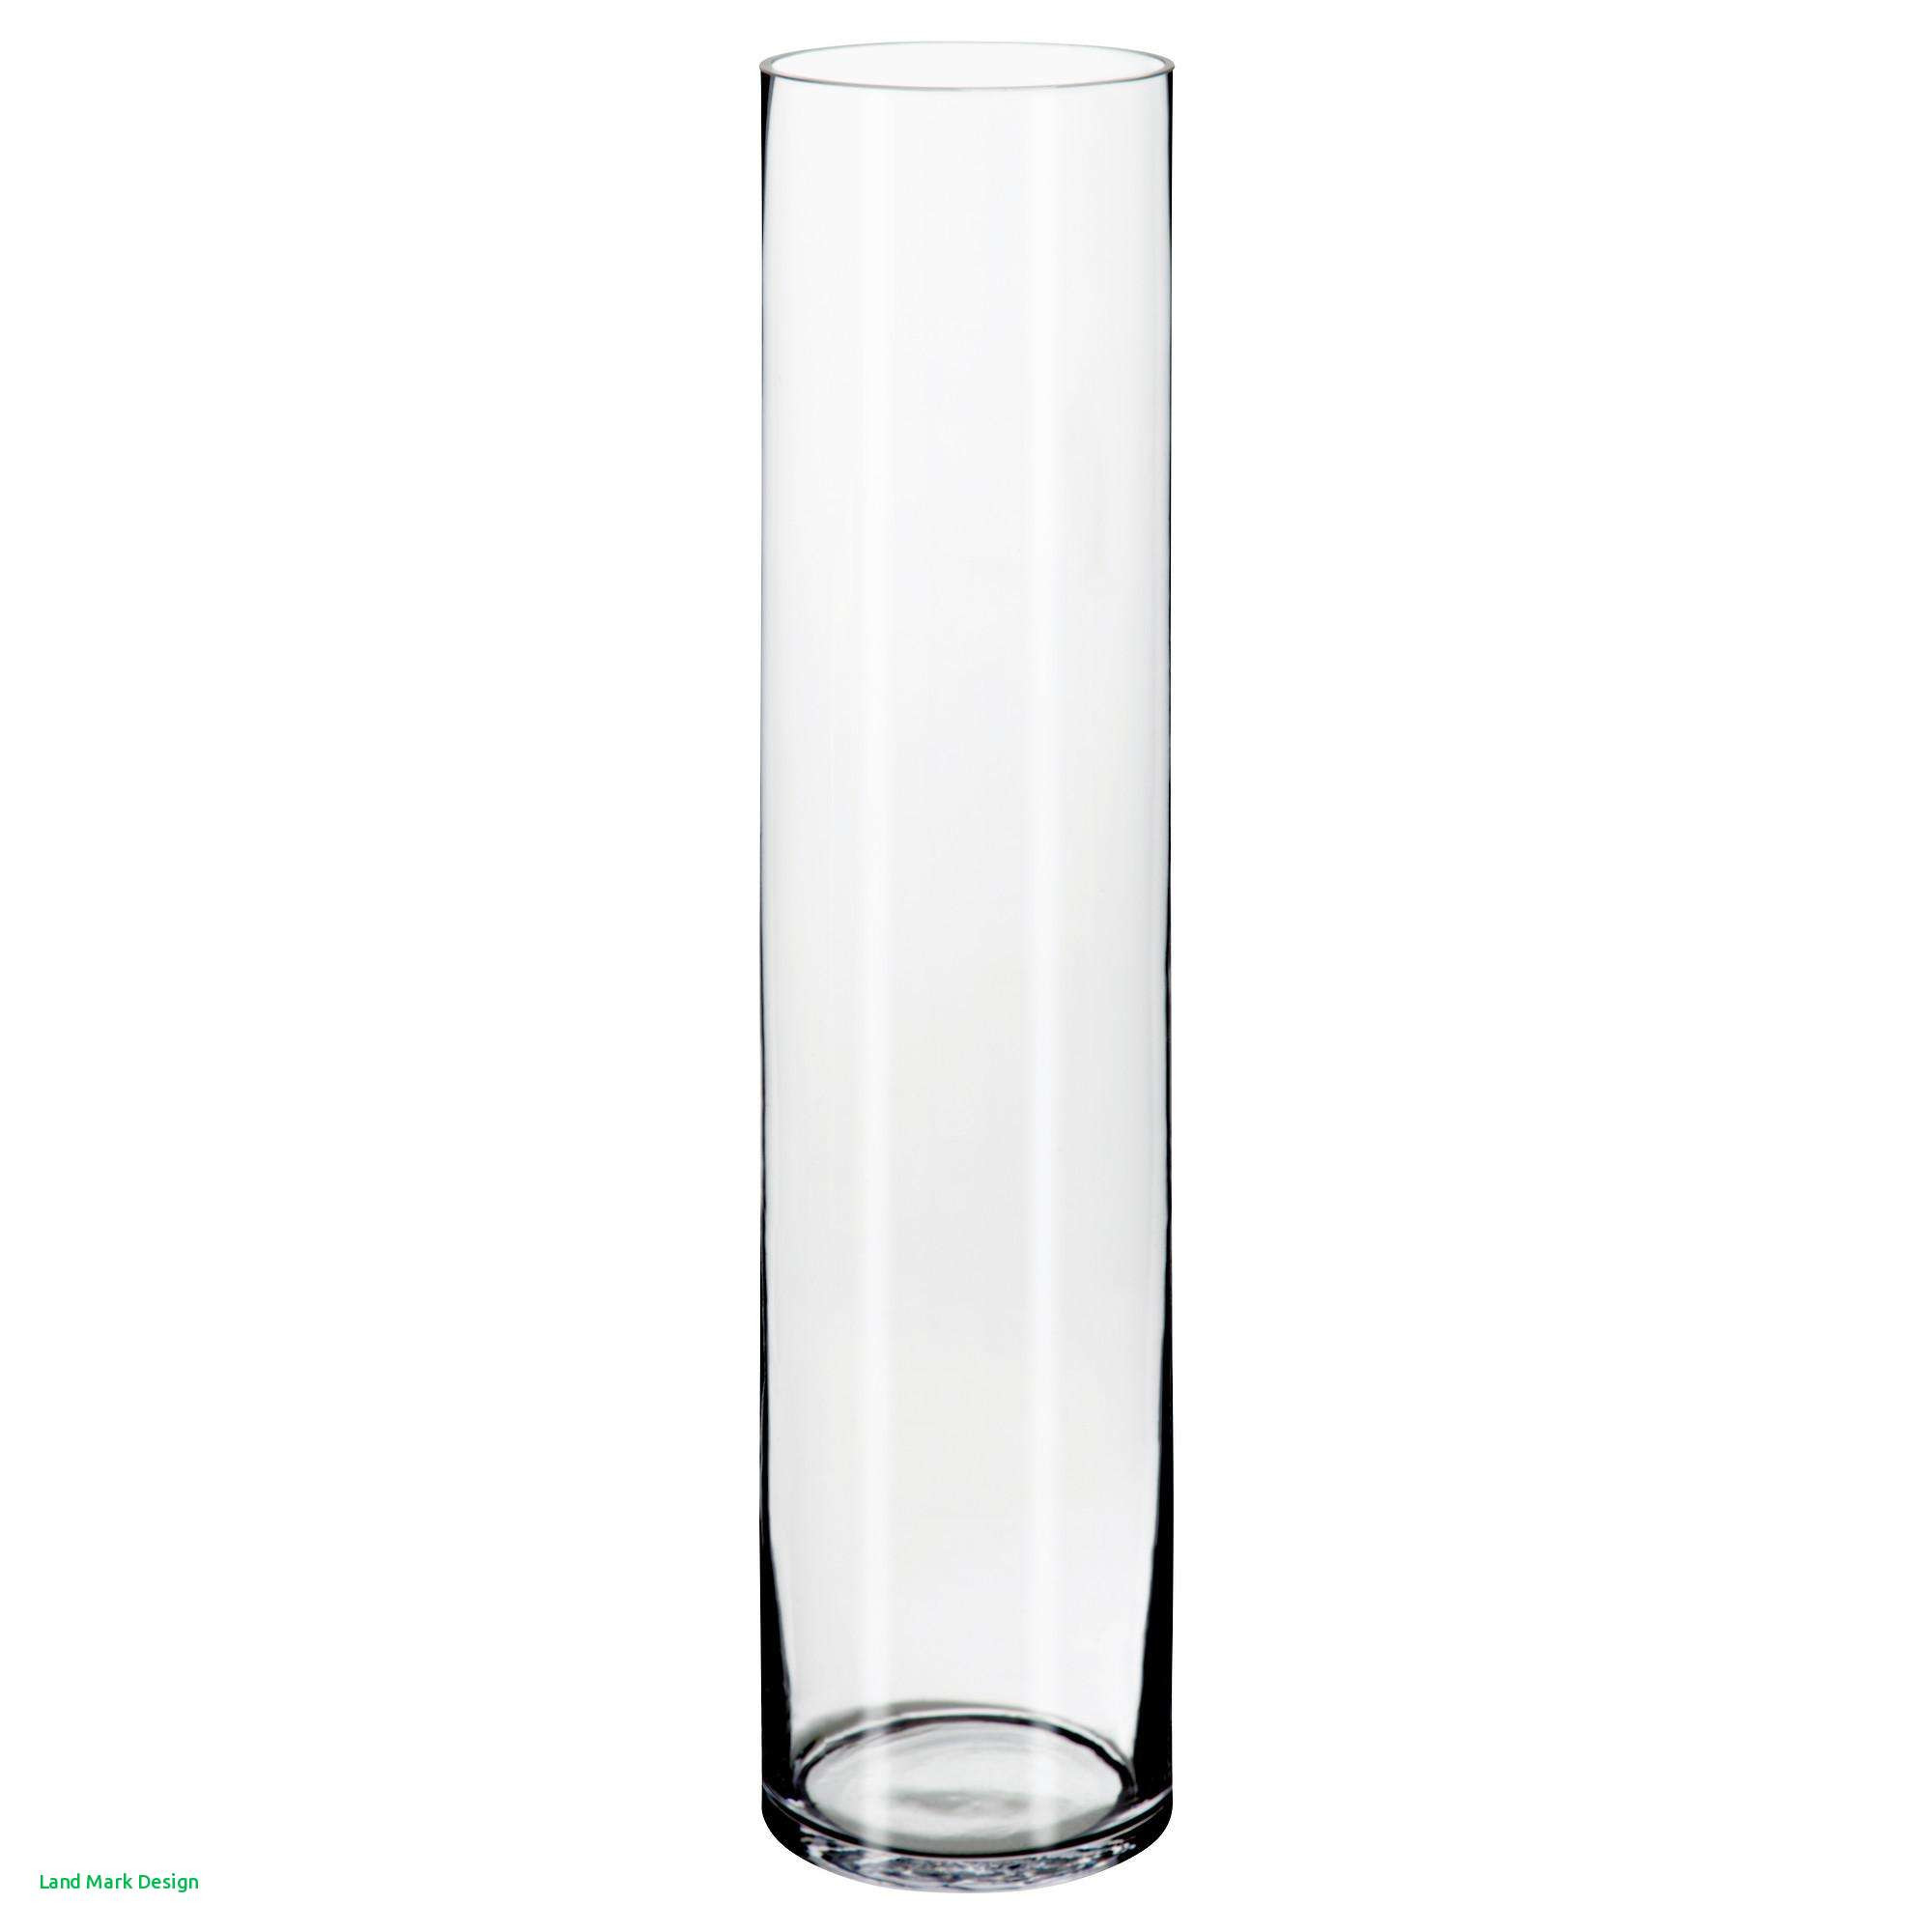 17 Awesome Large Glass Vase with Lid 2024 free download large glass vase with lid of ikea floor vases design home design regarding full size of living room vase glass fresh pe s5h vases ikea floor vase i large